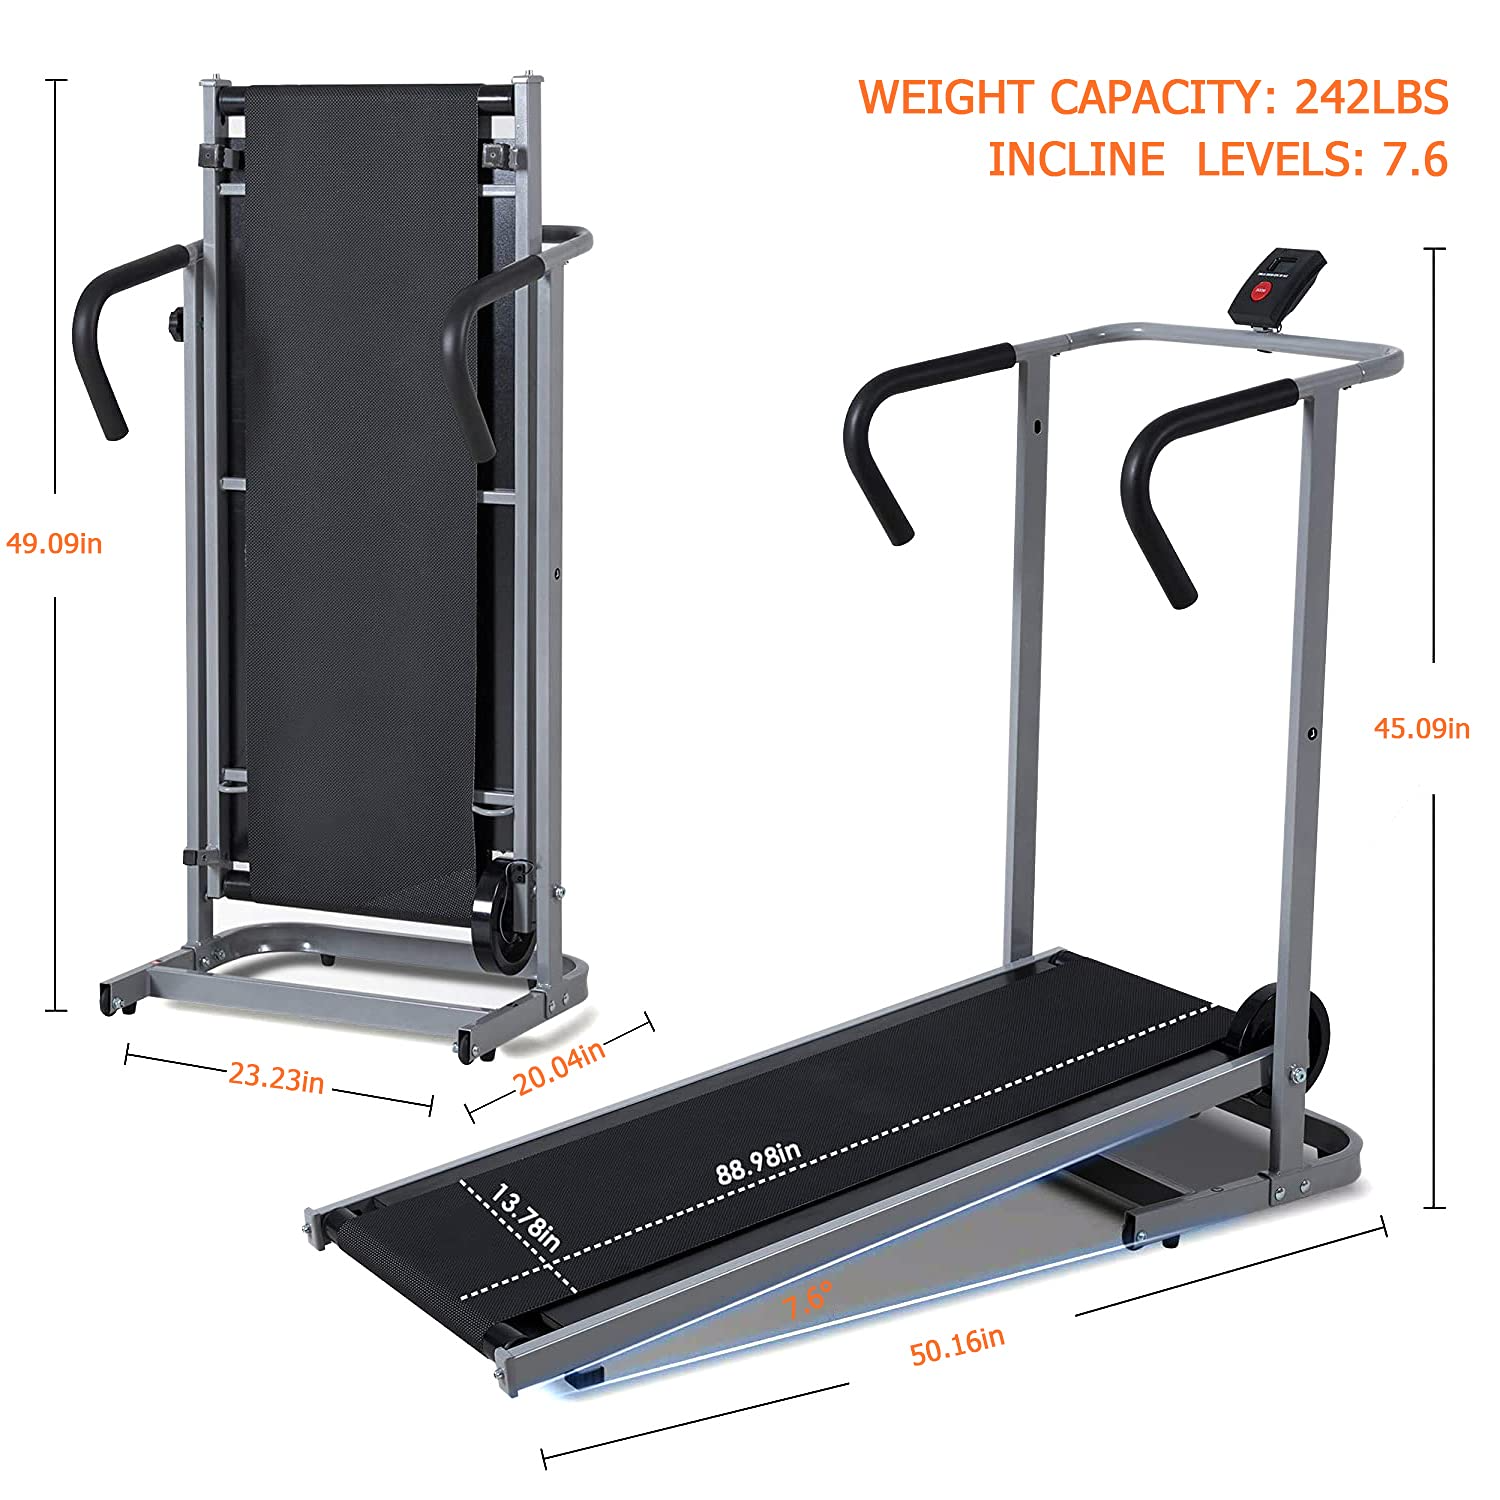 Load image into Gallery viewer, Treadmill Foldable Manual Walking Running Machine with LCD Display, Portable Wheels and Max Capacity 242 LBS for Home Use
